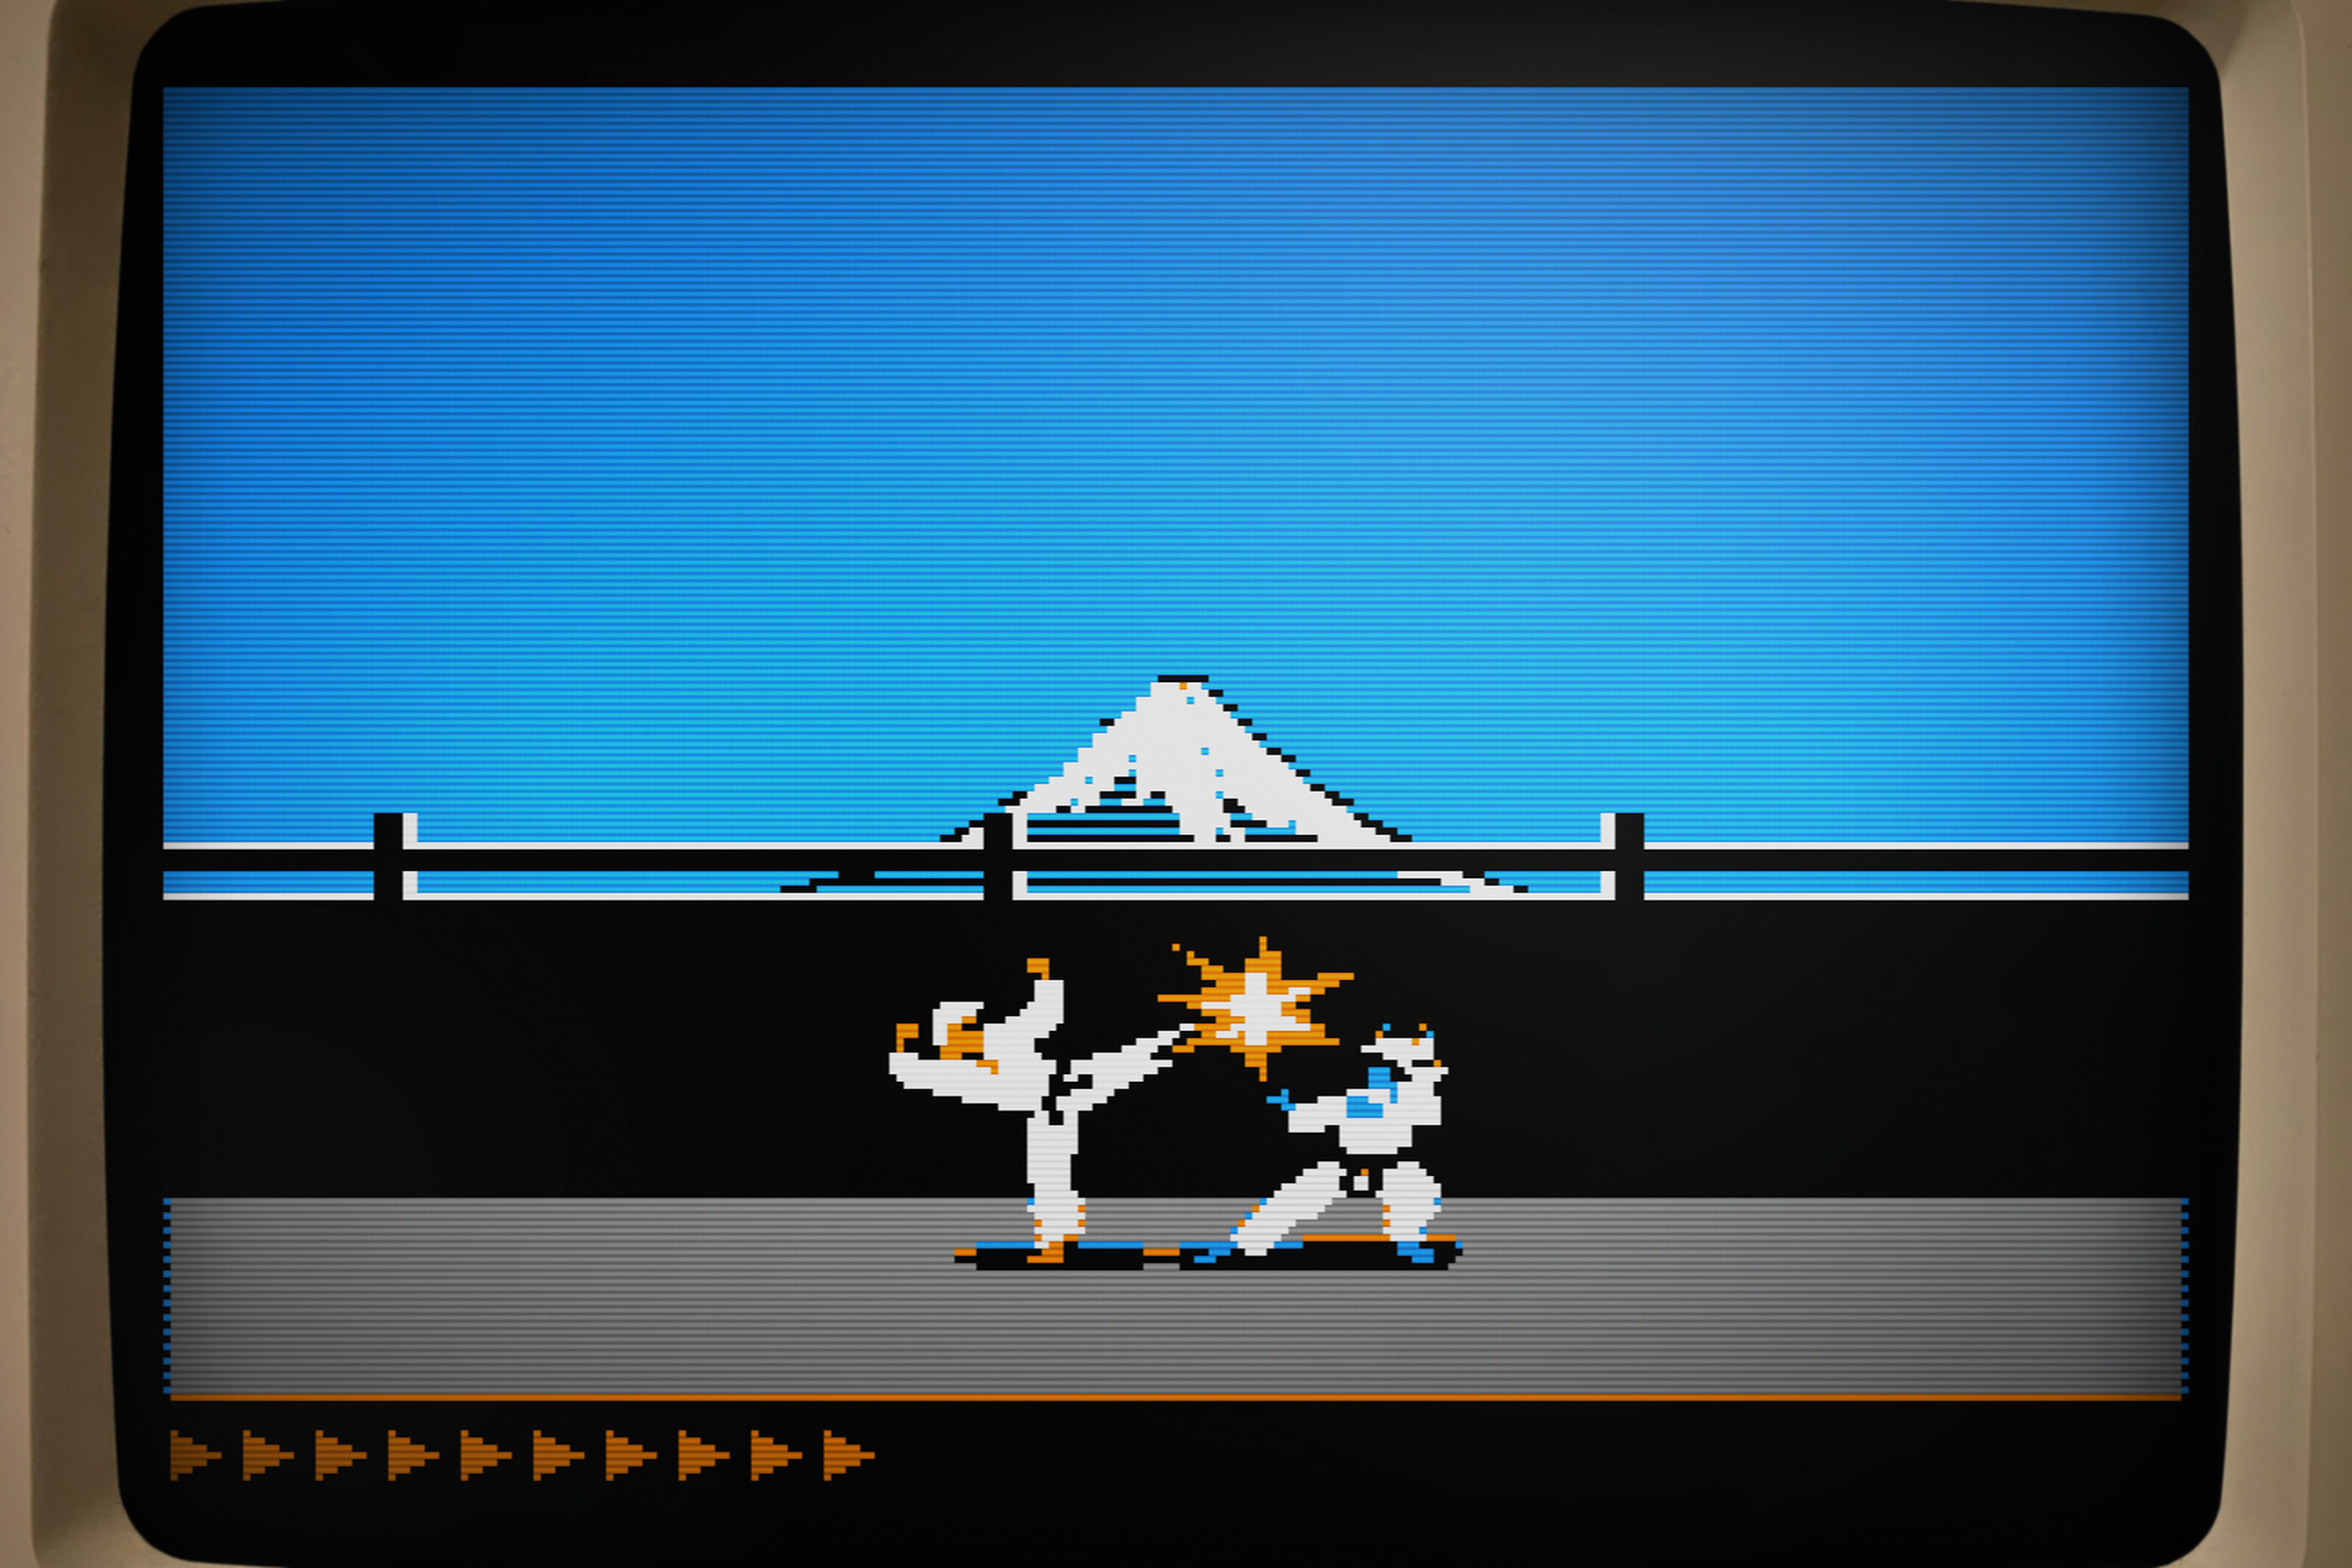 A screenshot from the video game The Making of Karateka.